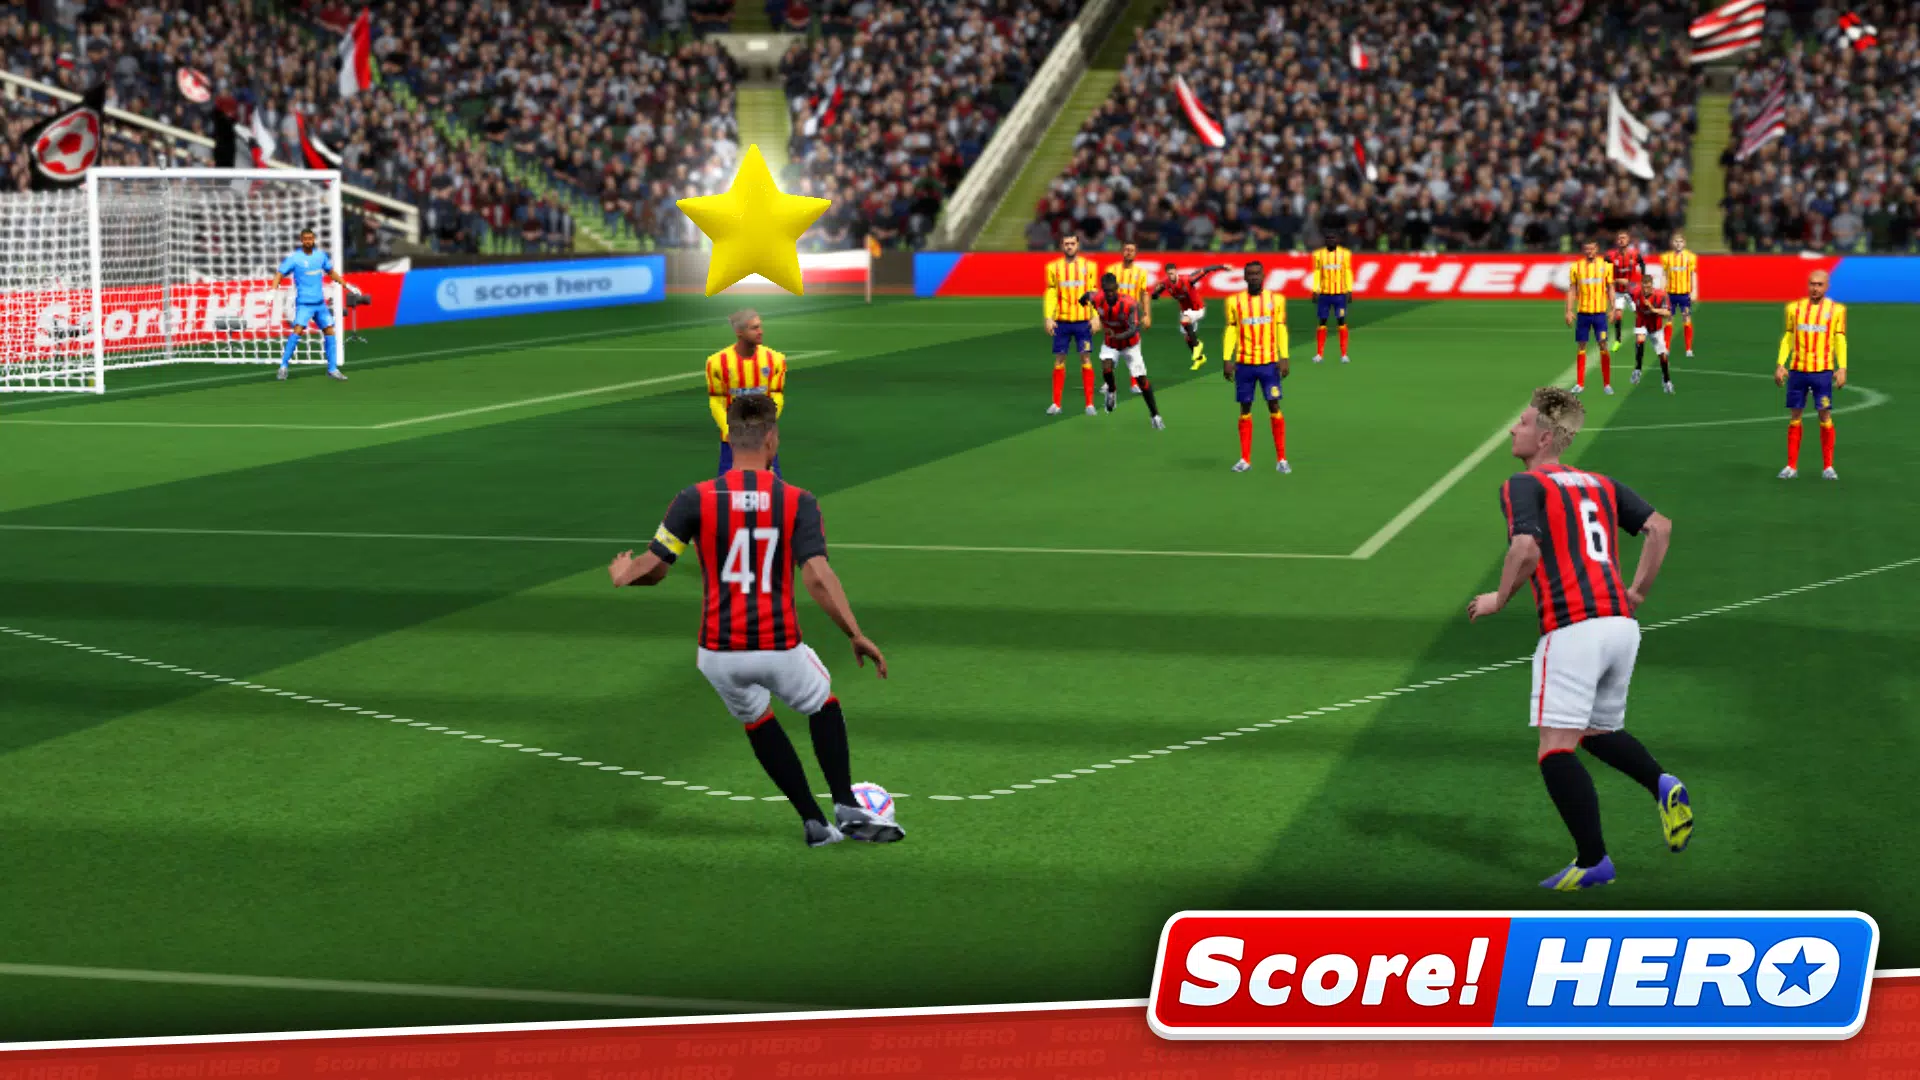 Score! Game for Android - Download